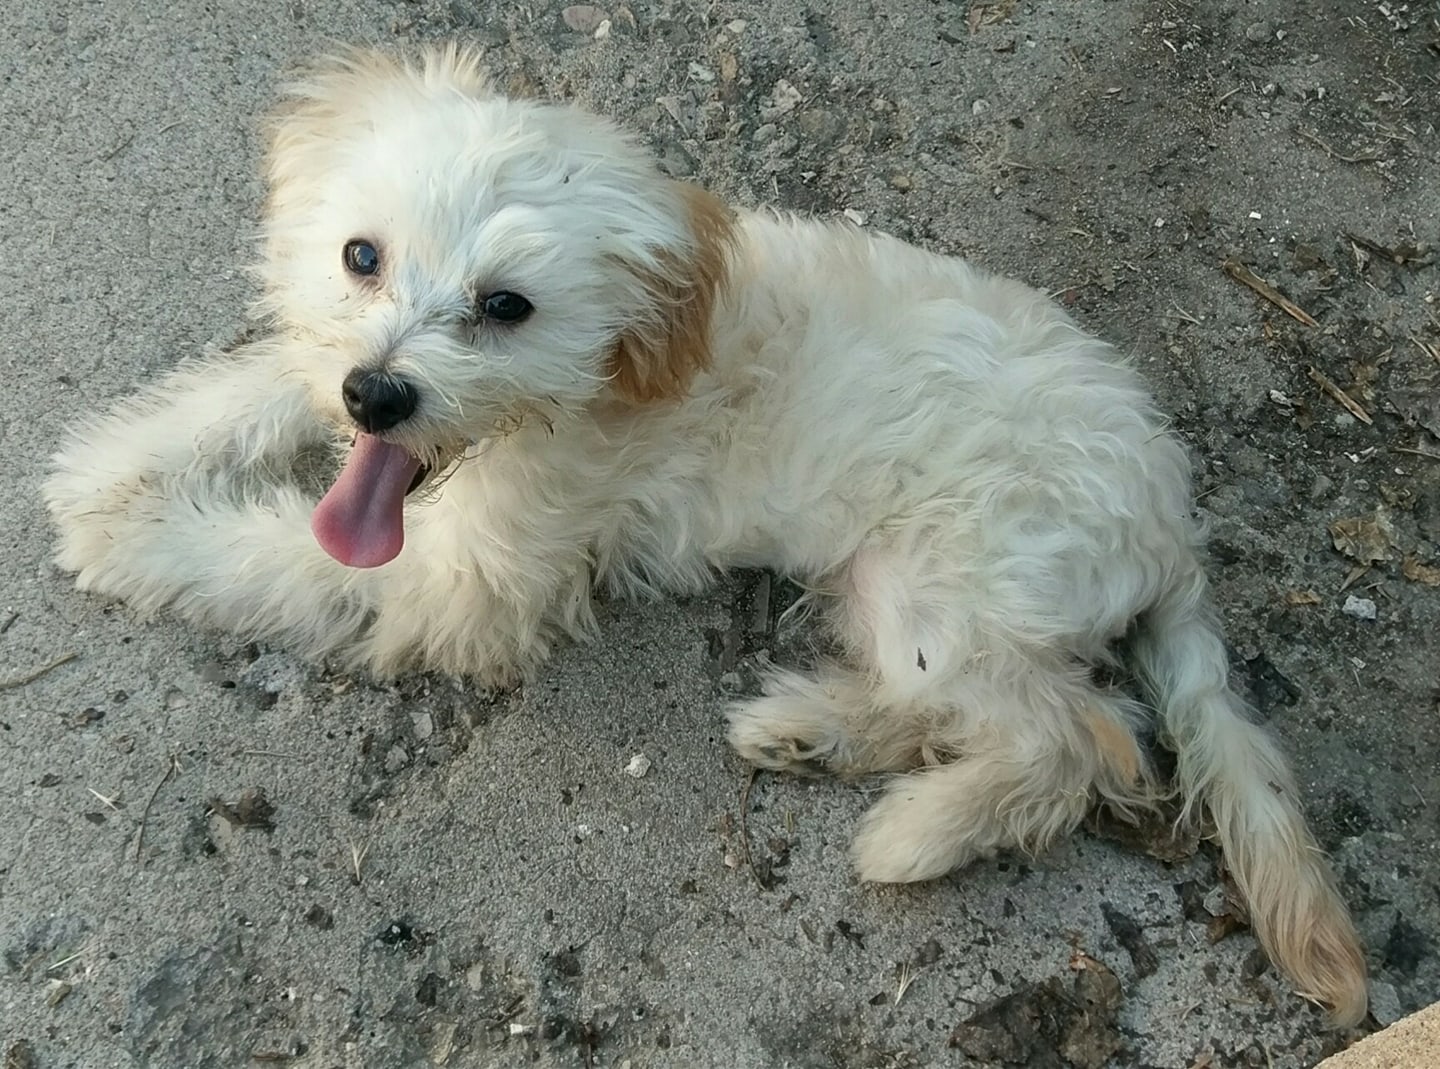 Nugget, the adorable Yorkie-Poo, lounging on the concrete with its tongue out, looking relaxed and happy